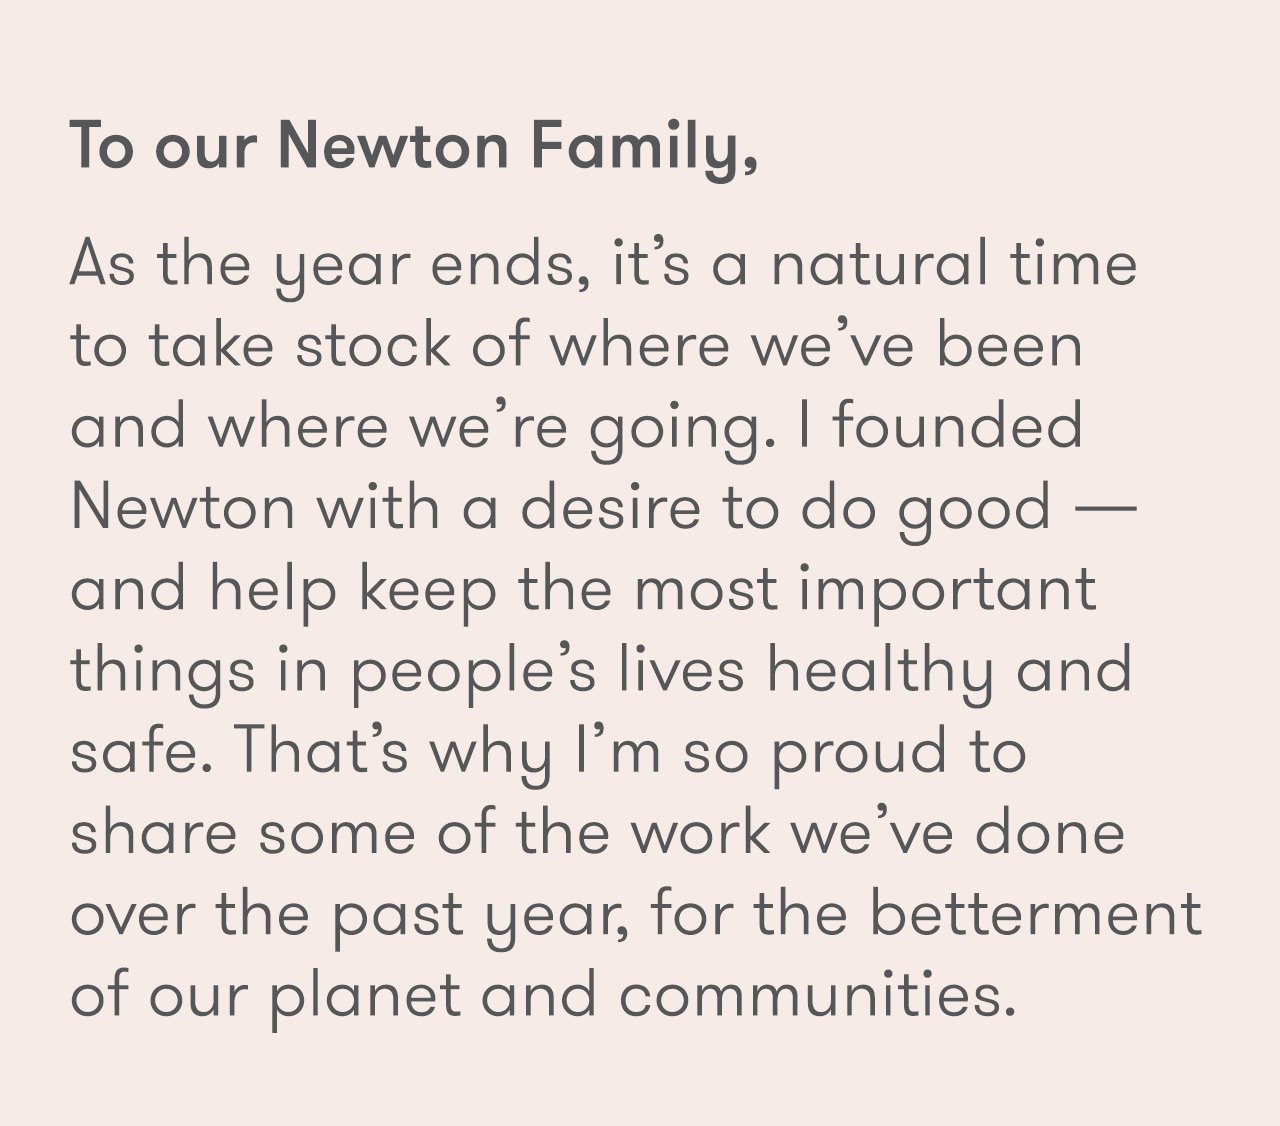 A big thank you for the work you've helped us do over the past year to better our planet and communities